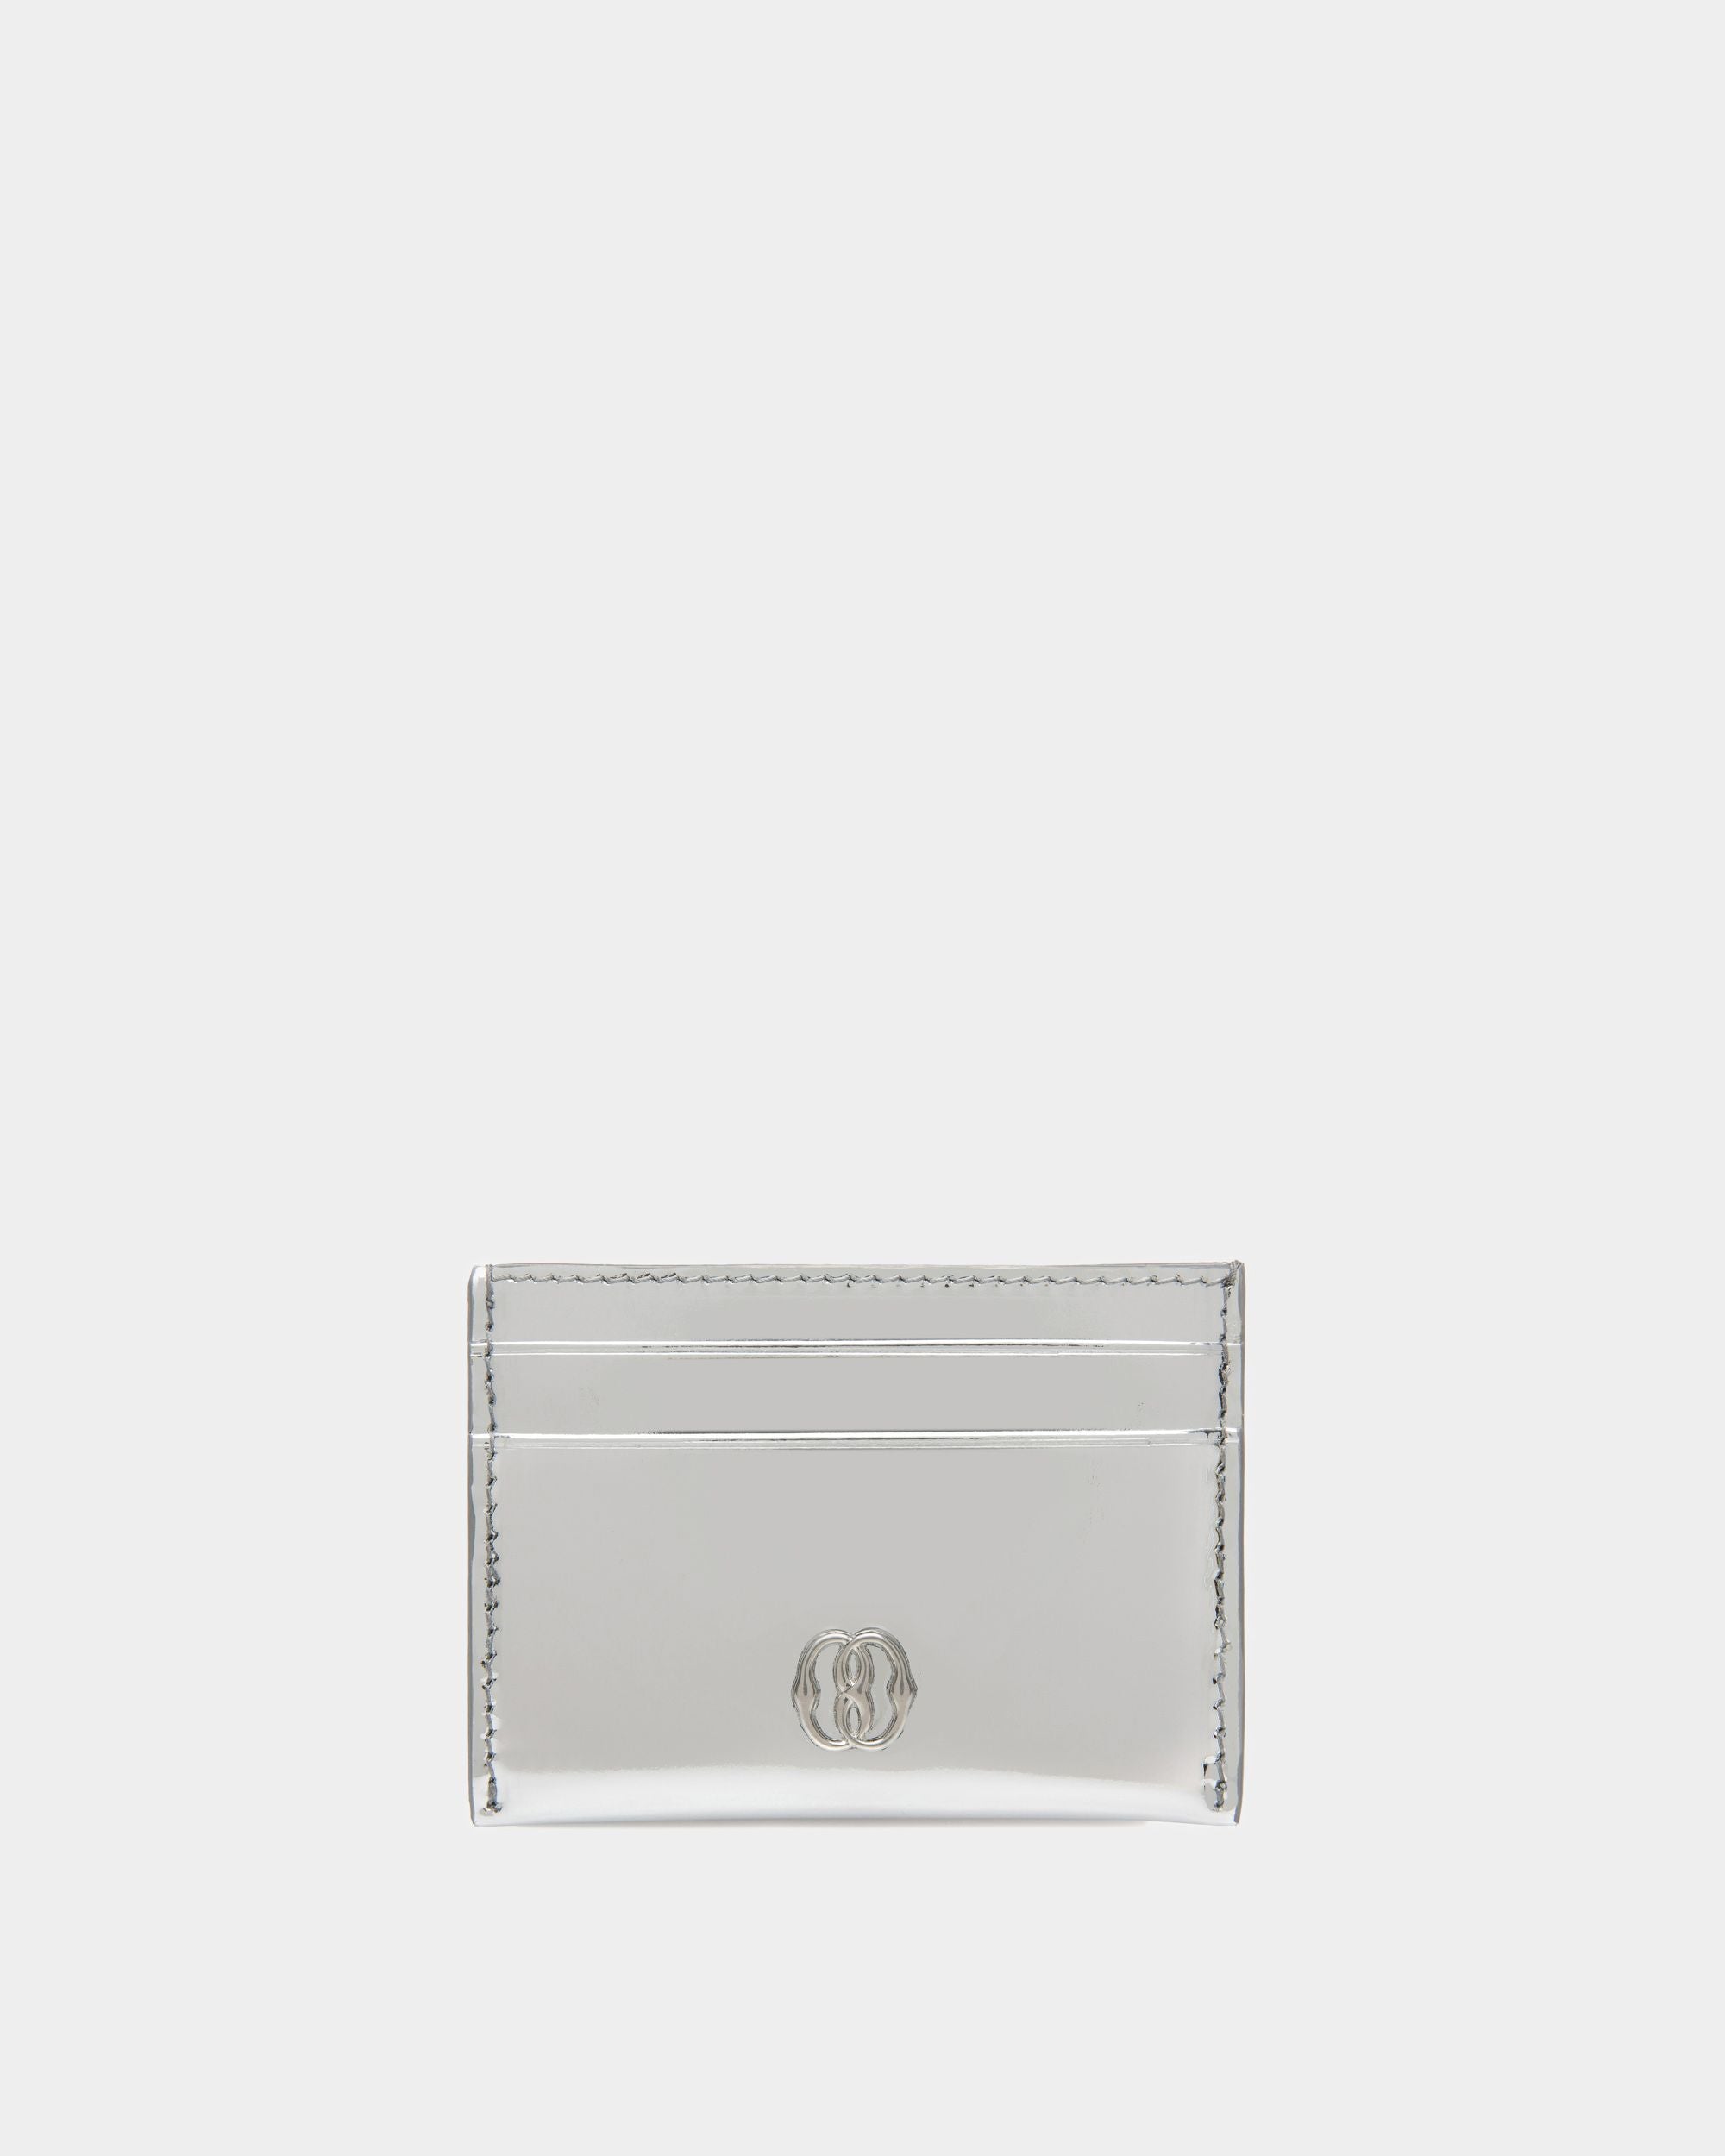 Emblem | Women's Business Card Holder | Silver Leather | Bally | Still Life Front